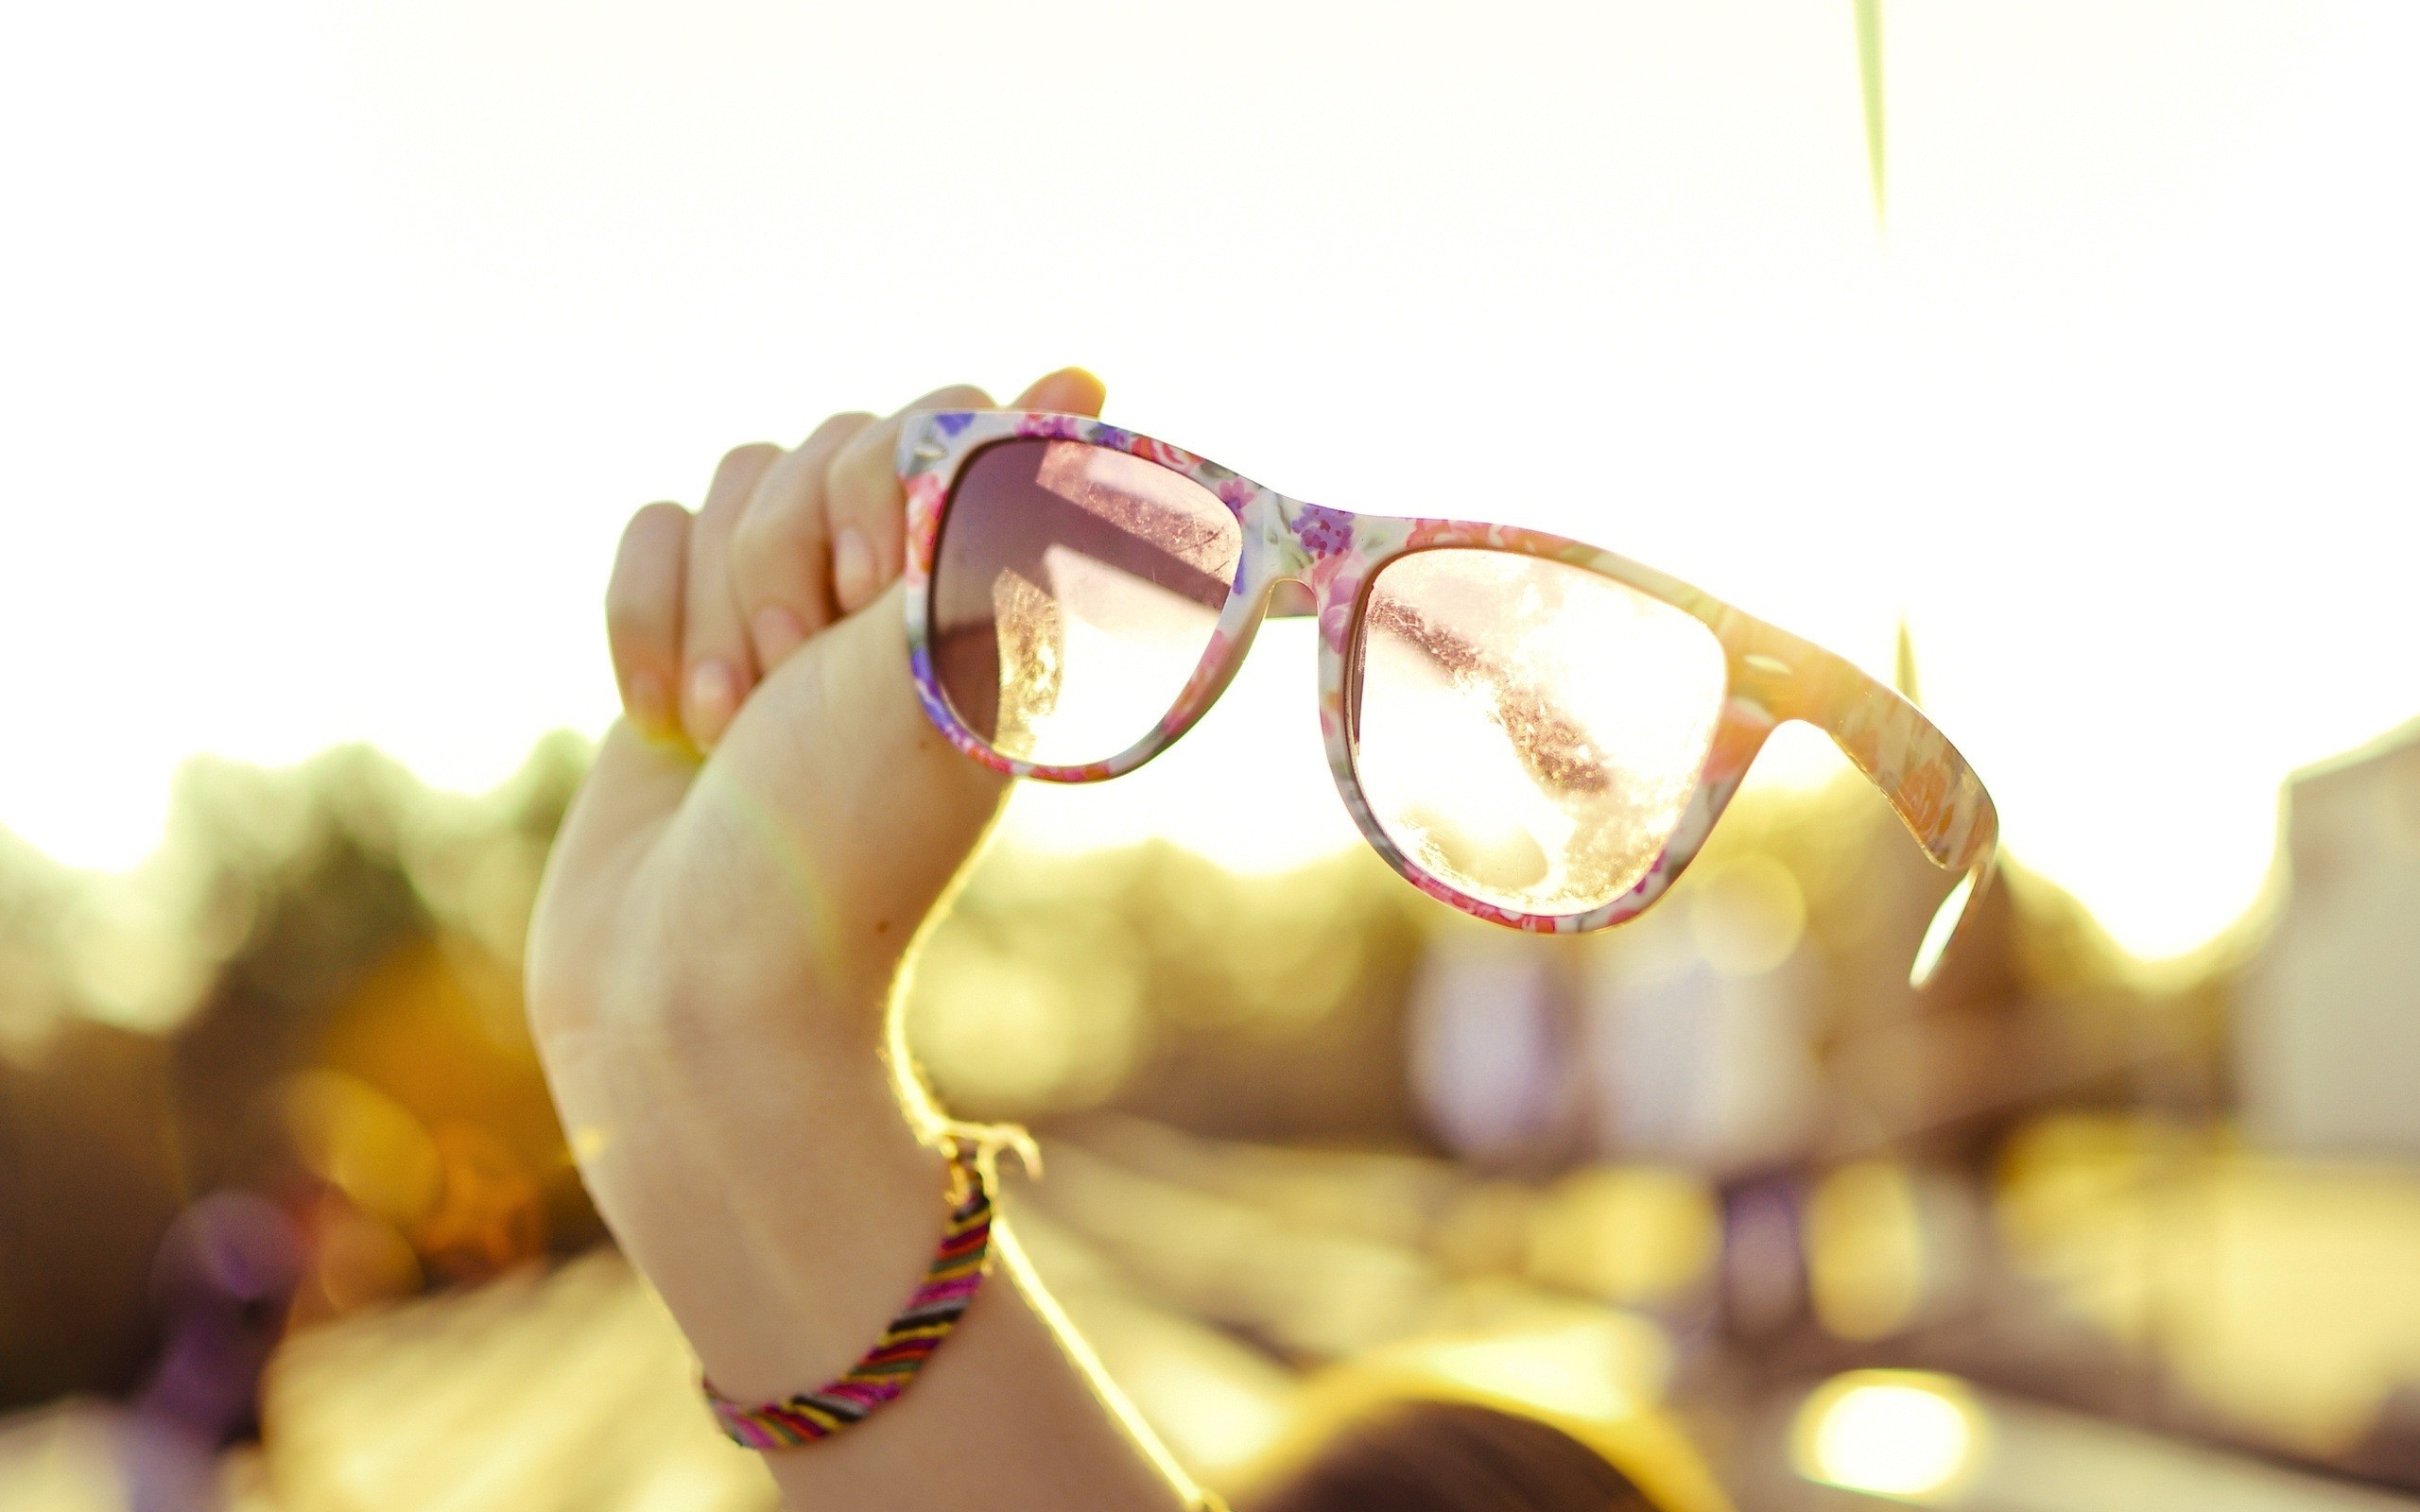 Hands Glasses Sunlight Wallpaper - Mobile Android Trendy Wallpapers Hd , HD Wallpaper & Backgrounds